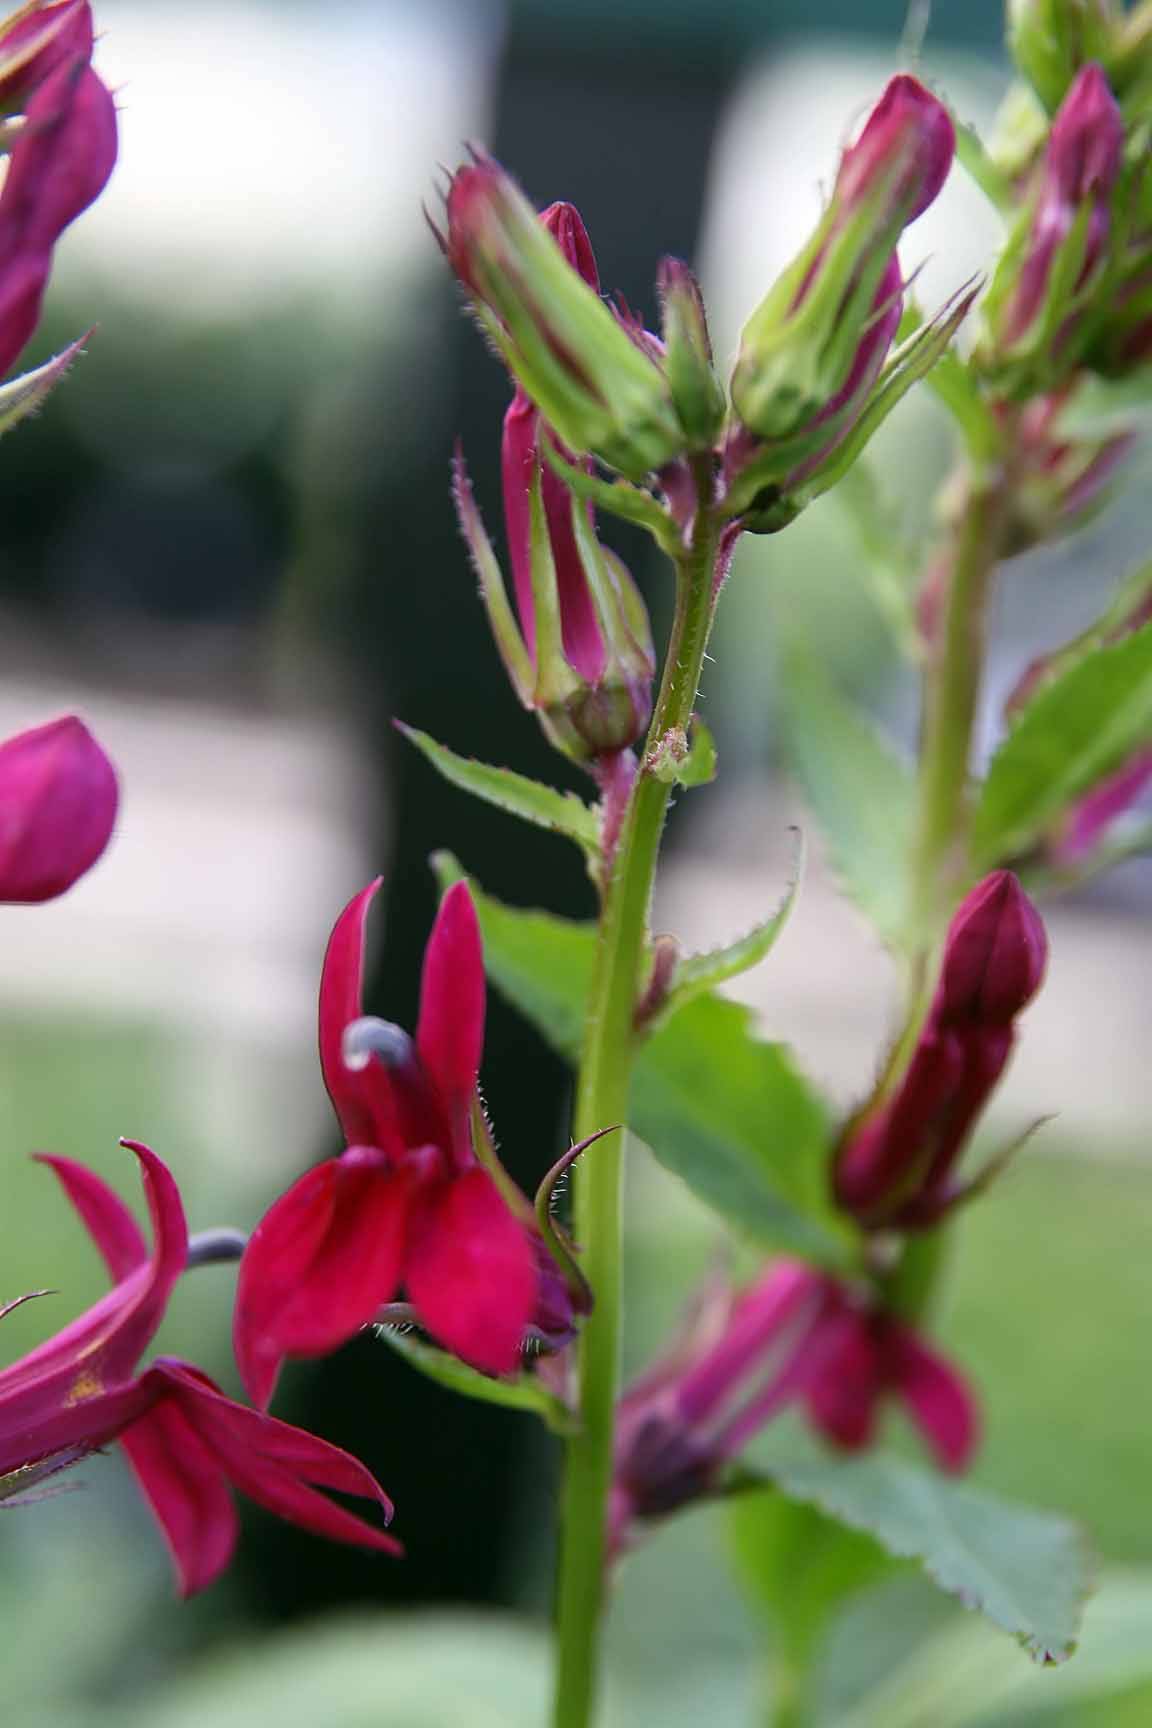 red-pink flowers with pink buds, green sepals, lime leaves and stems